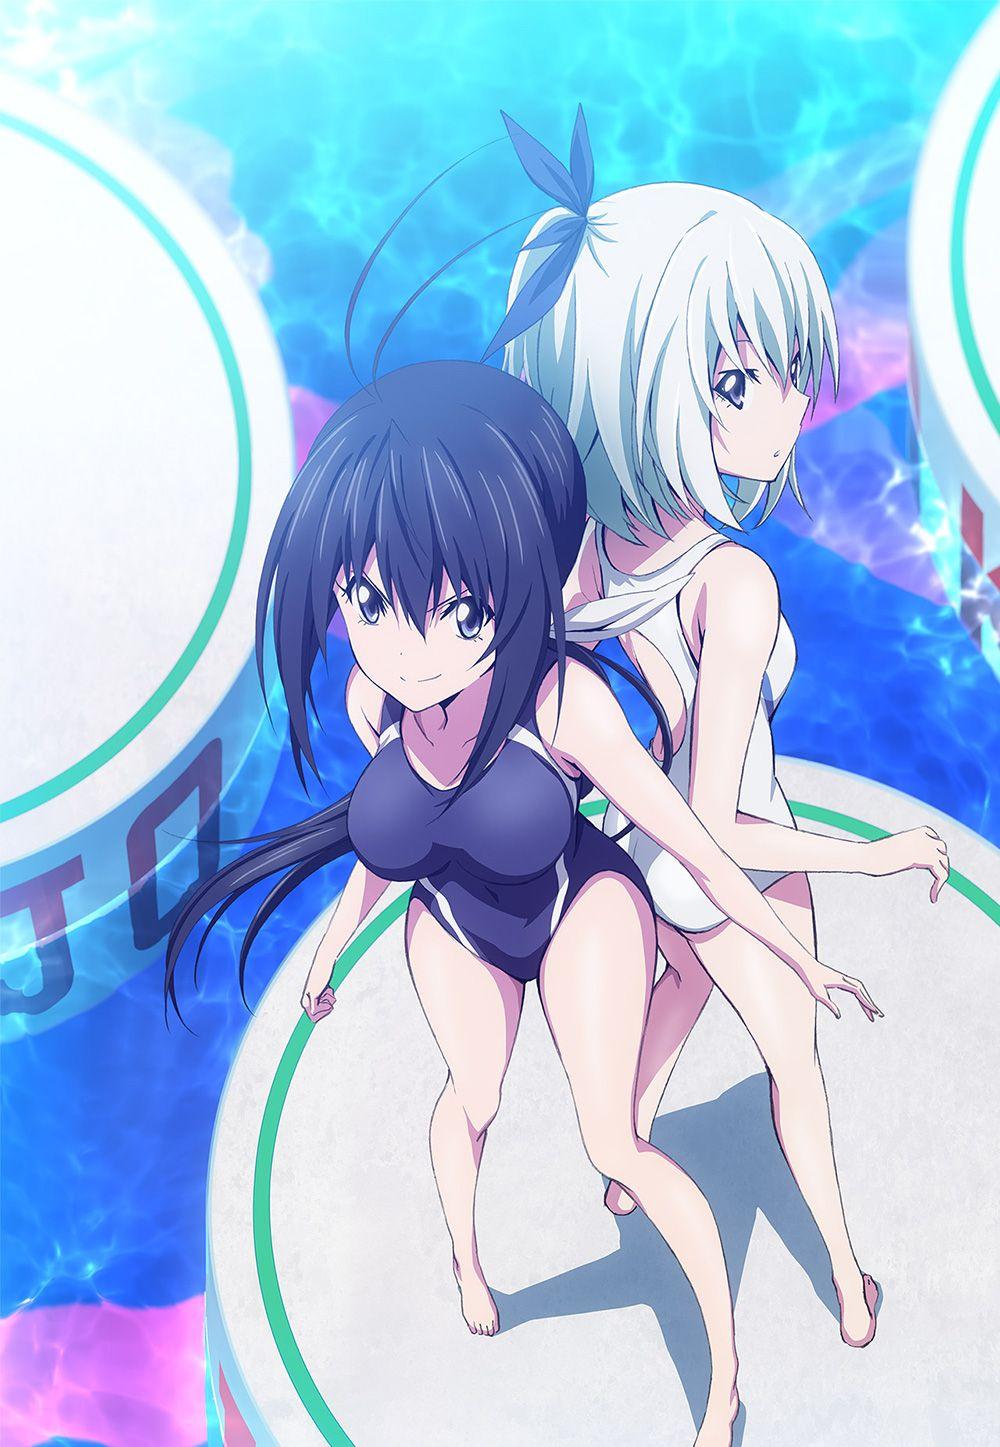 Additional Cast Revealed for Keijo!!!!!!!! TV Anime